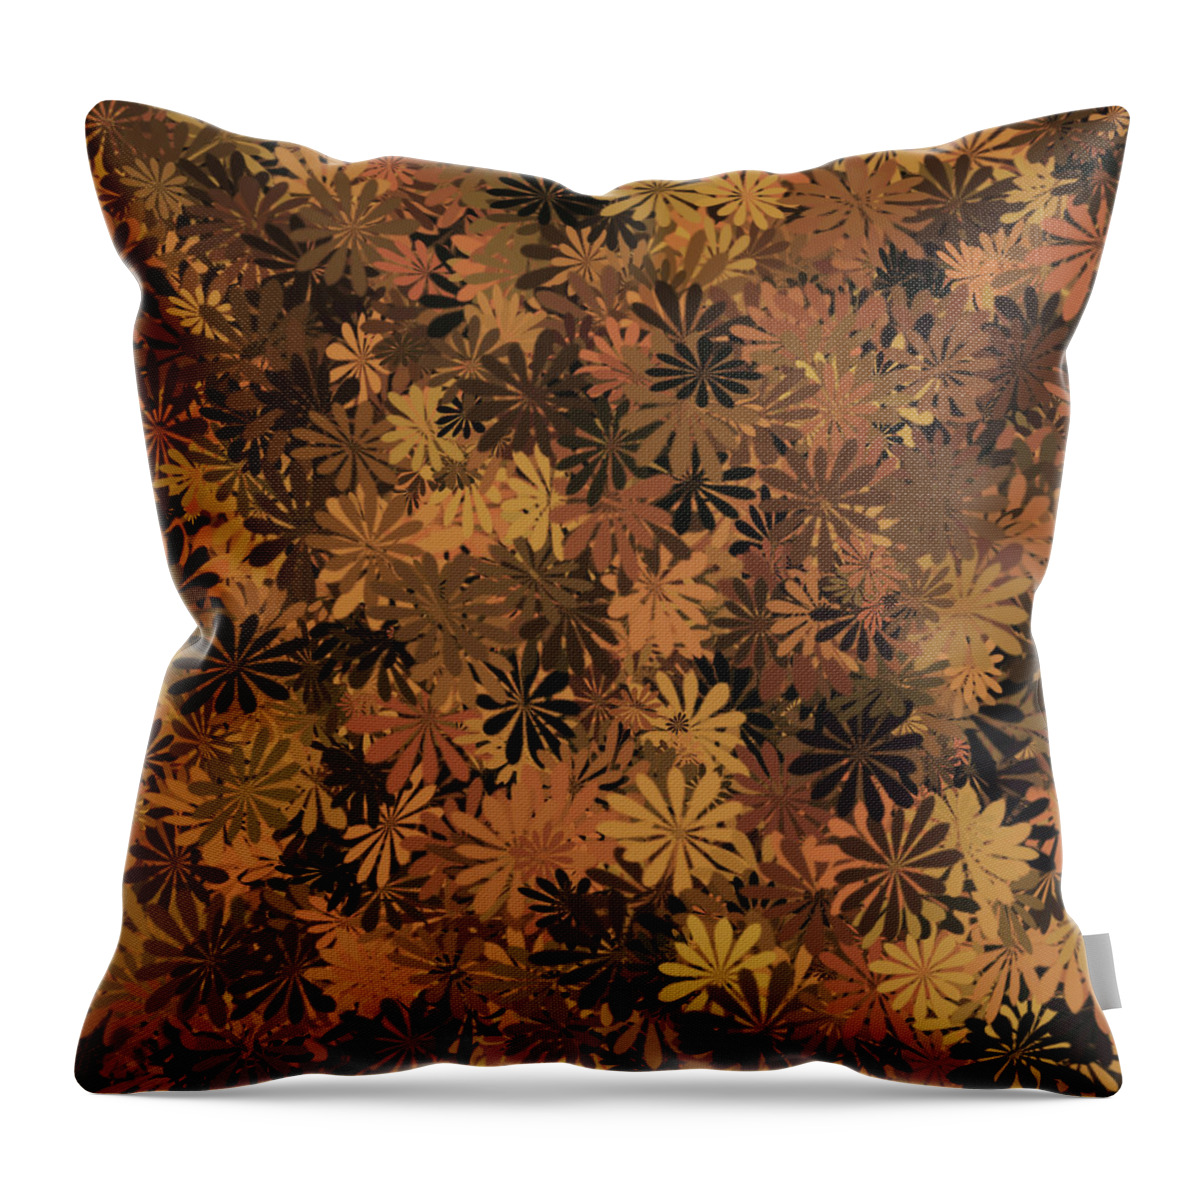 Flower Throw Pillow featuring the digital art Brown Floral Pattern by Aimee L Maher ALM GALLERY